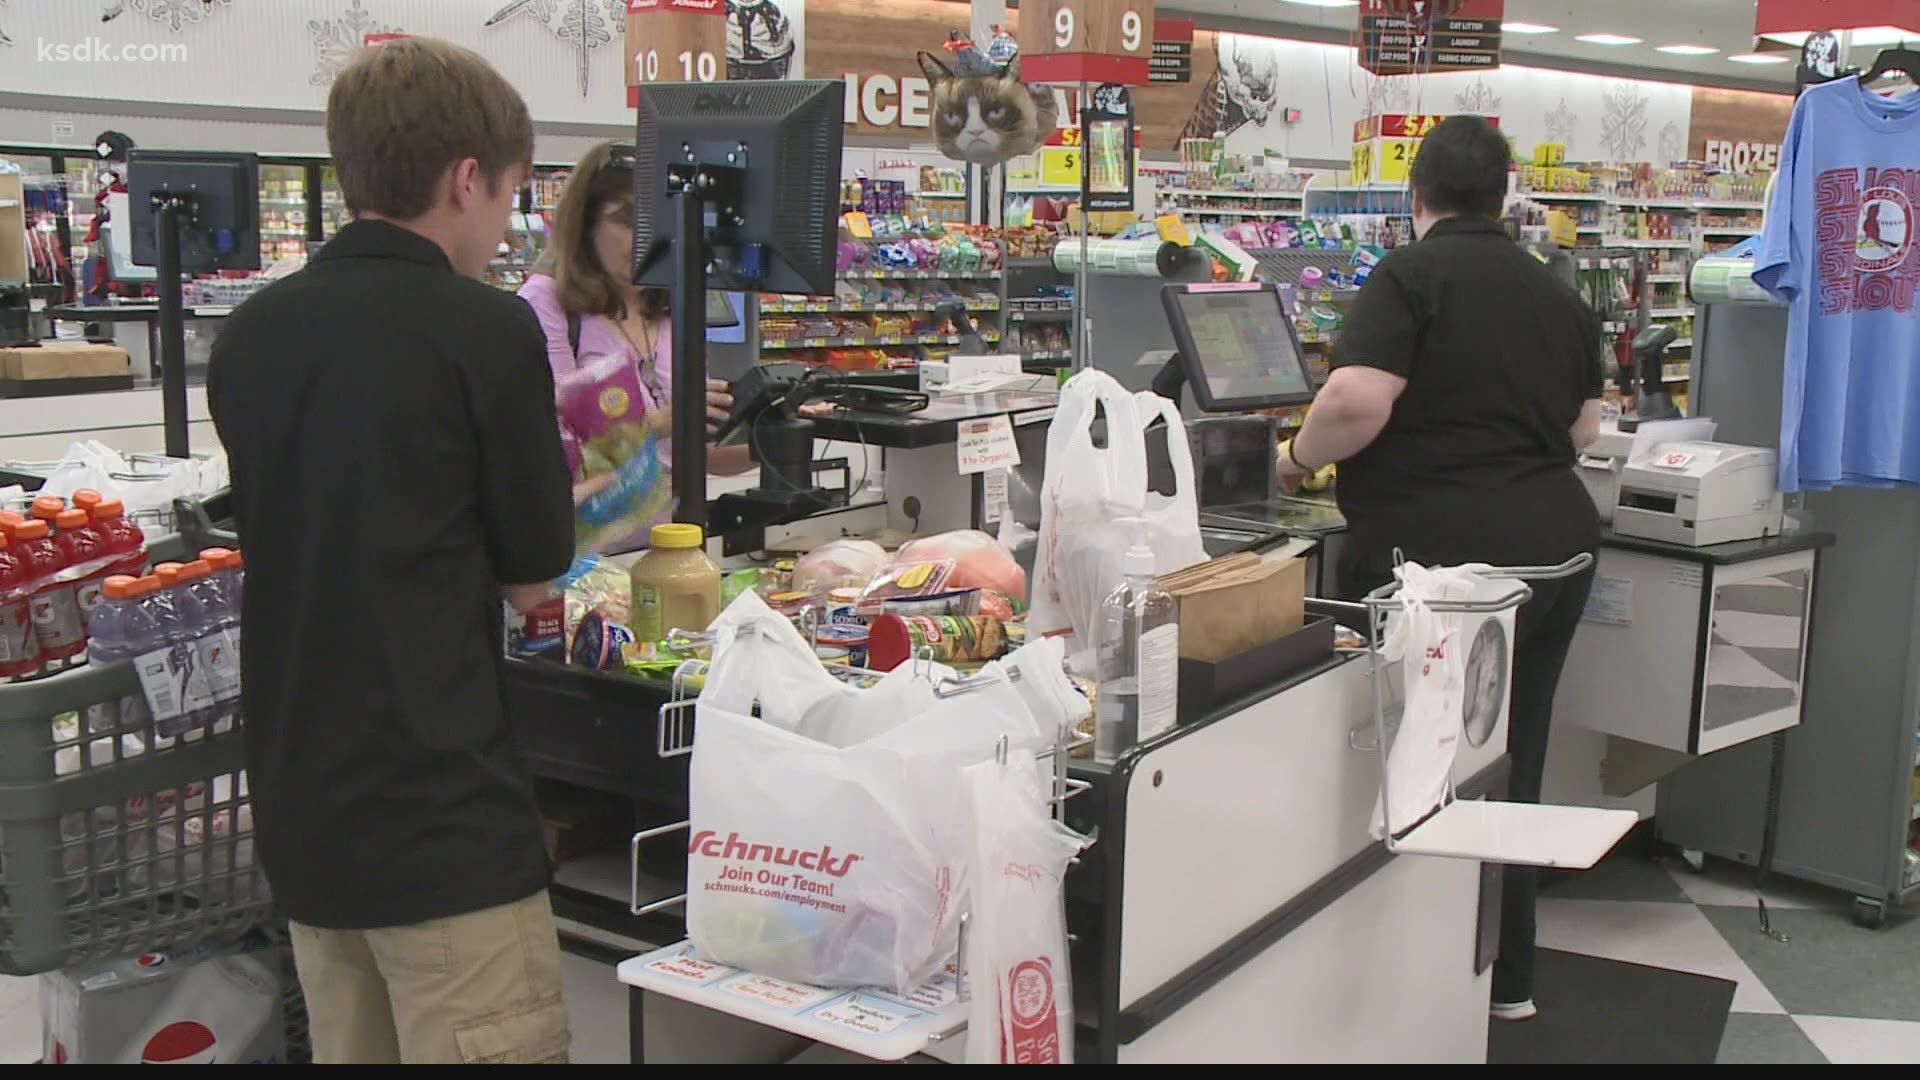 WorldPay has confirmed with Schnucks that all customers who were double-charged had those charges reversed on Tuesday